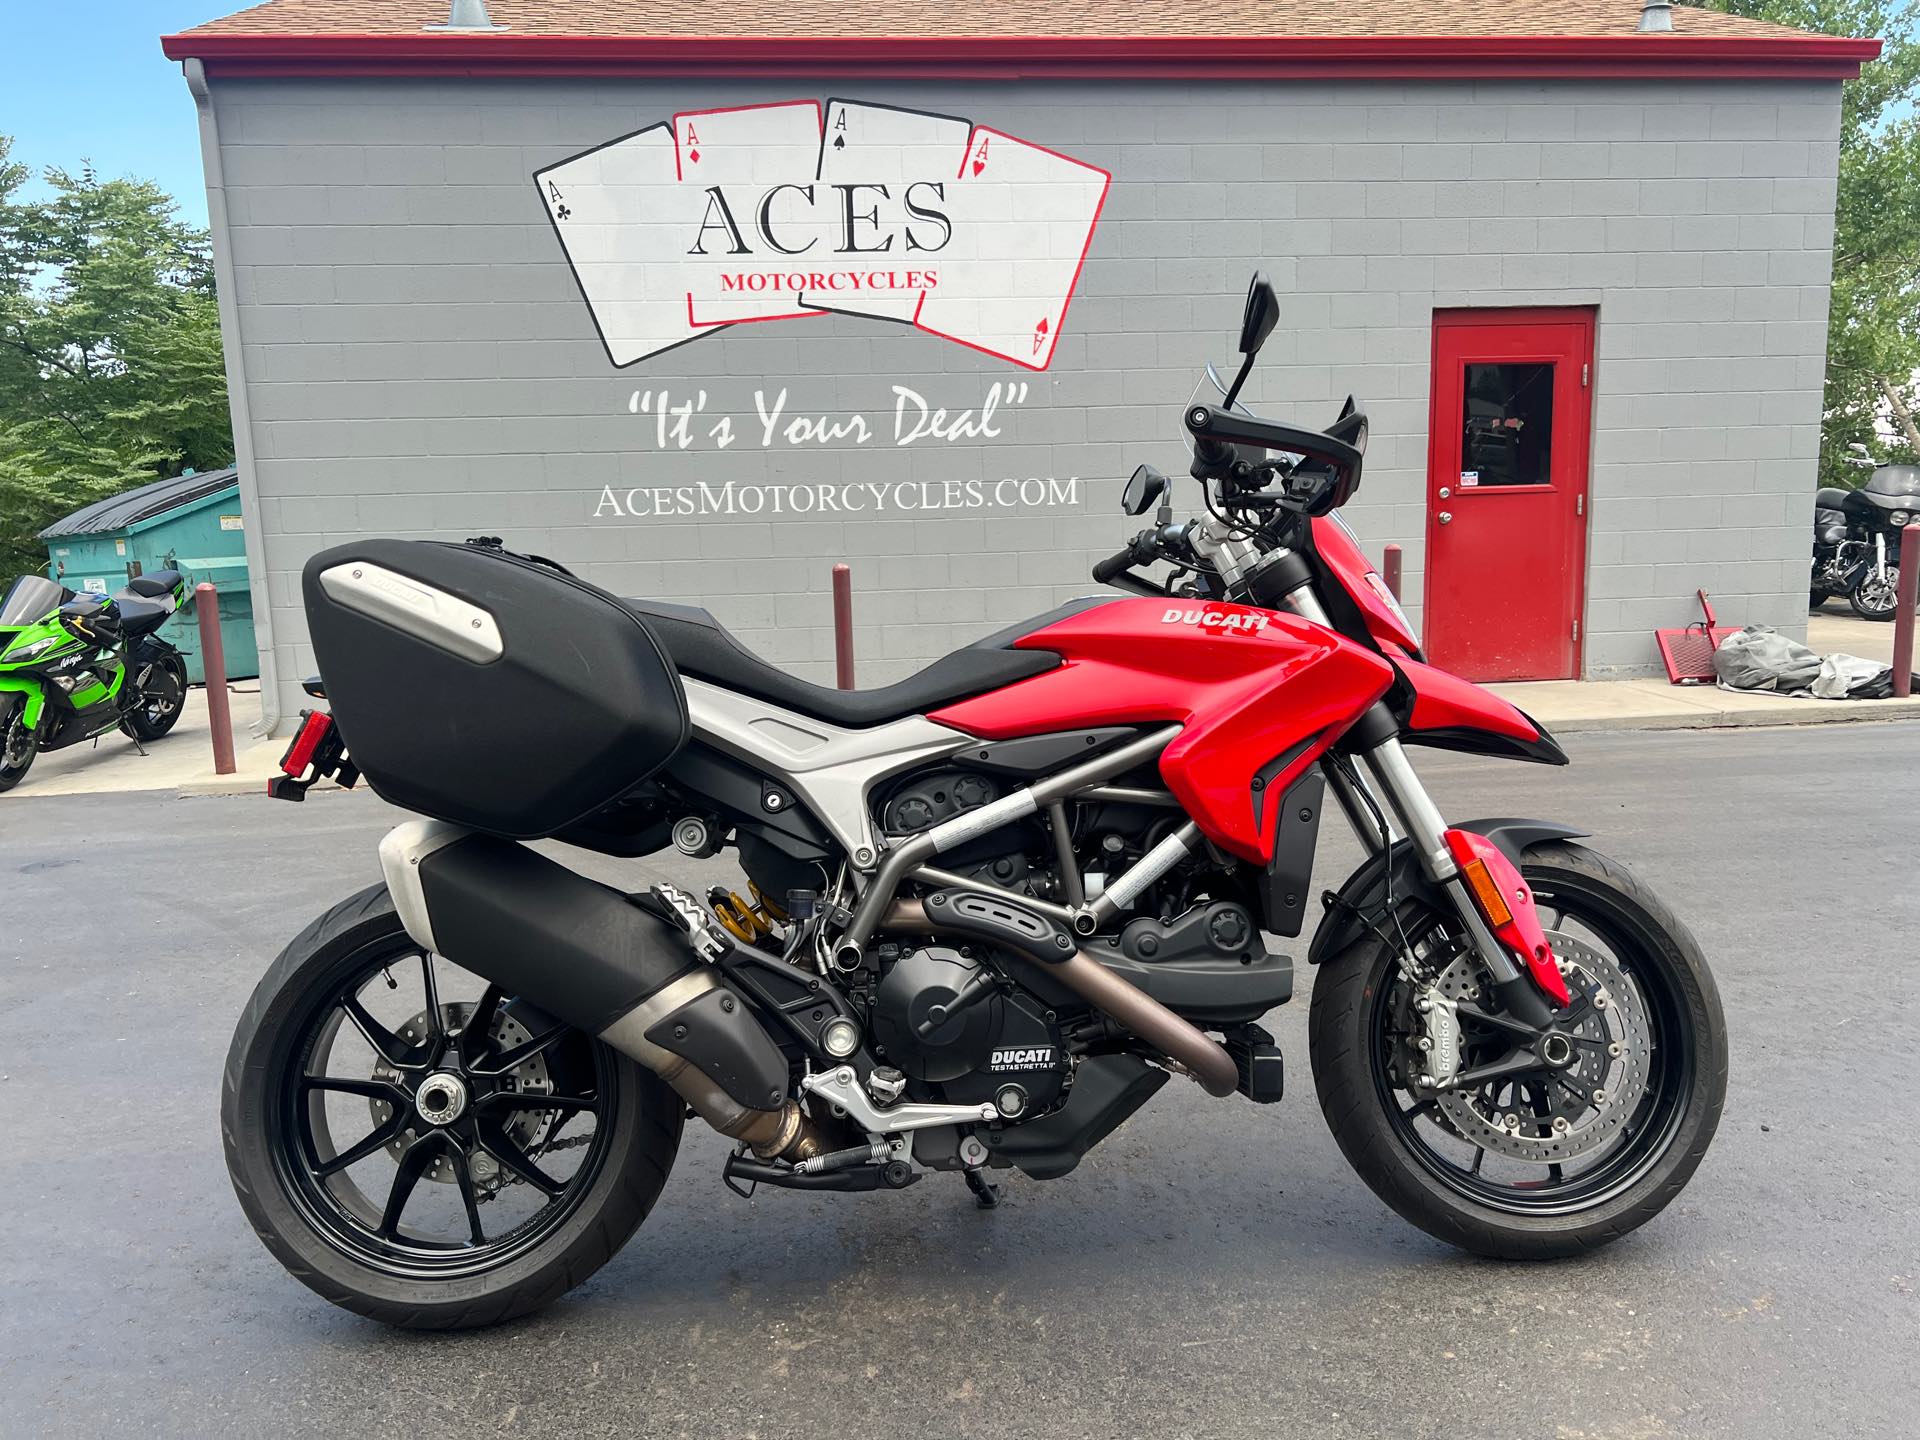 2016 Ducati Hyperstrada 939 at Aces Motorcycles - Fort Collins